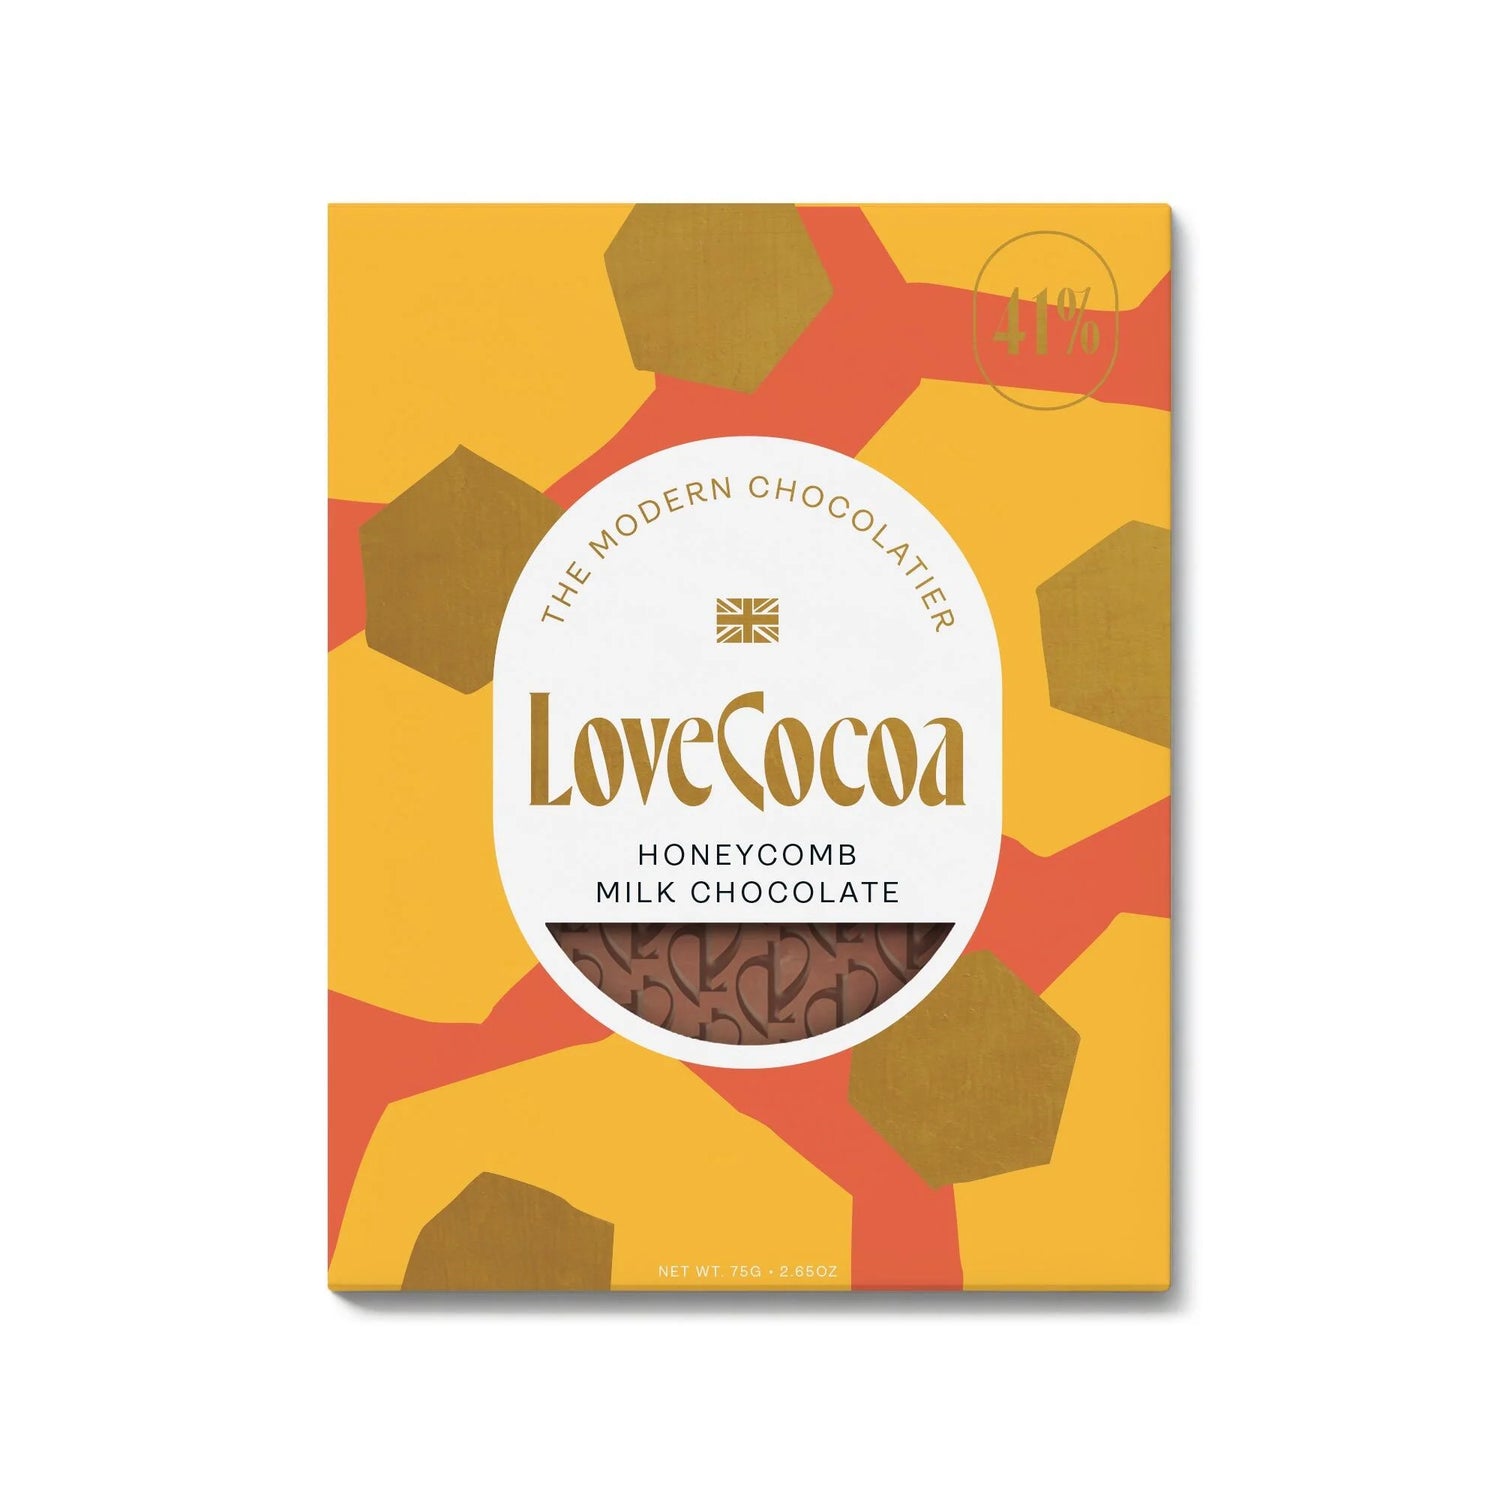 A bar of Love Cocoa honeycomb flavoured milk chocolate.